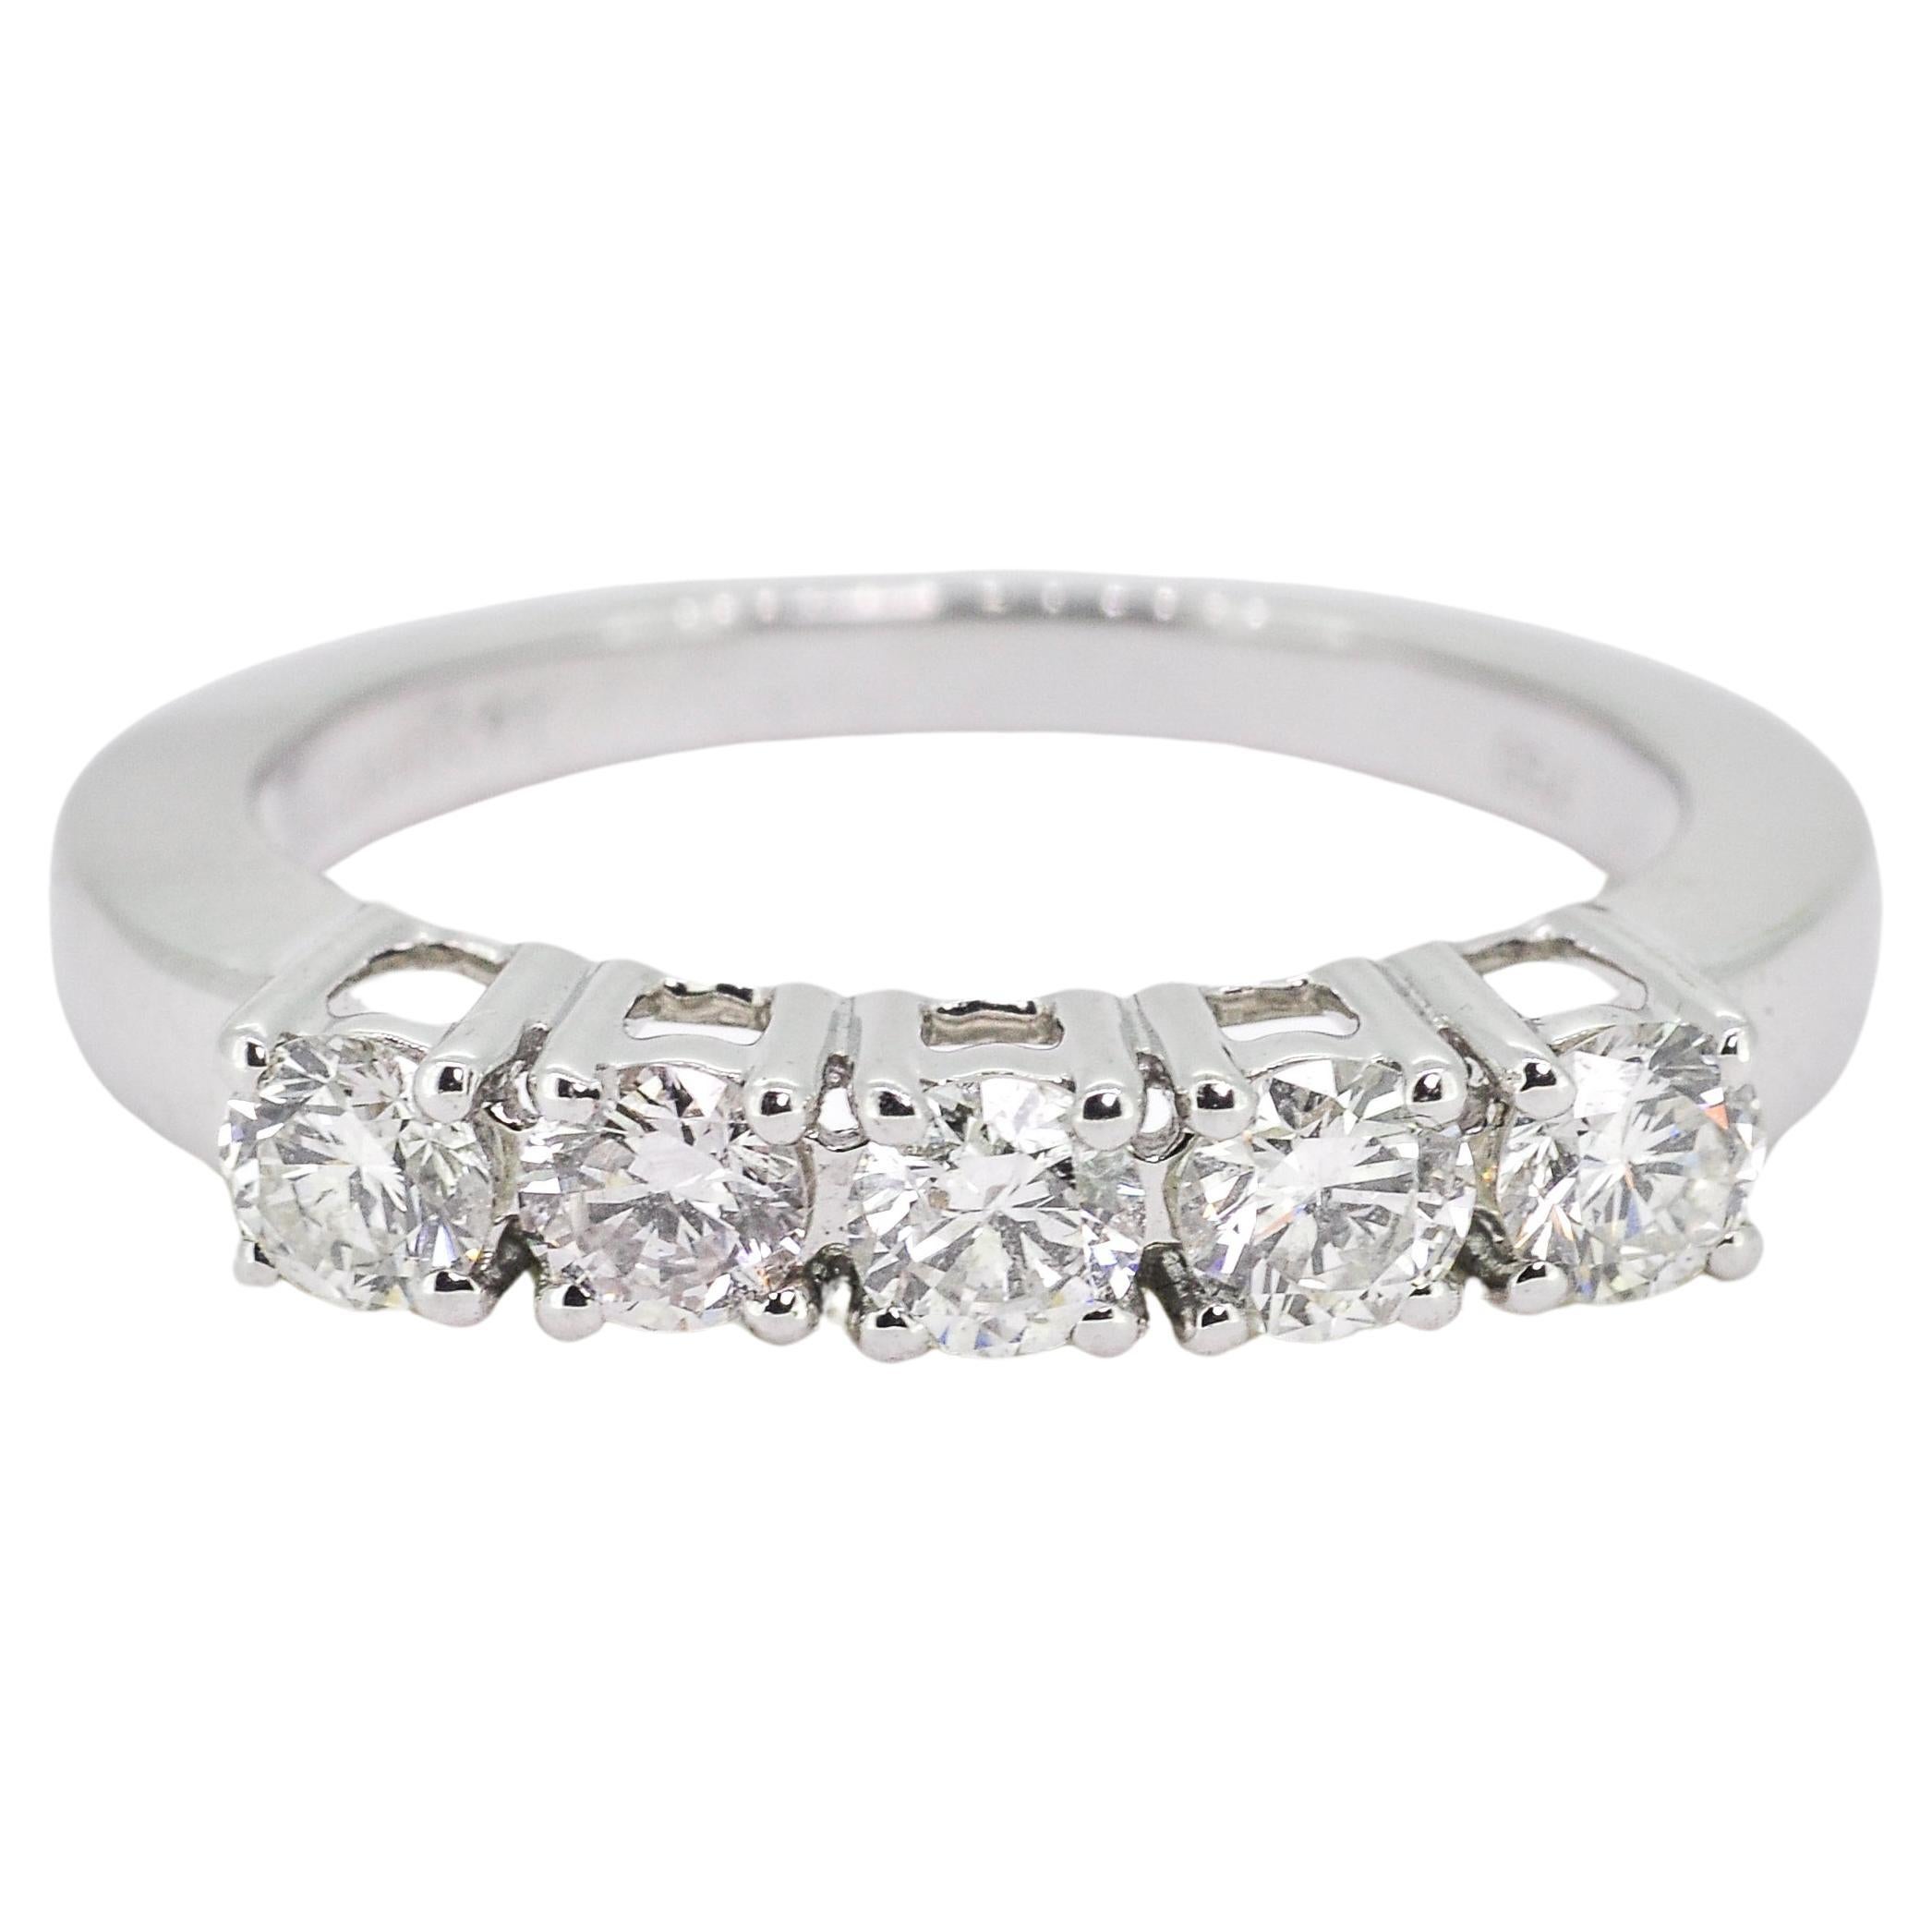 Natural Diamond Ring 0.85 carats 18KT White Gold 5 Round Solitaire Diamond Ring